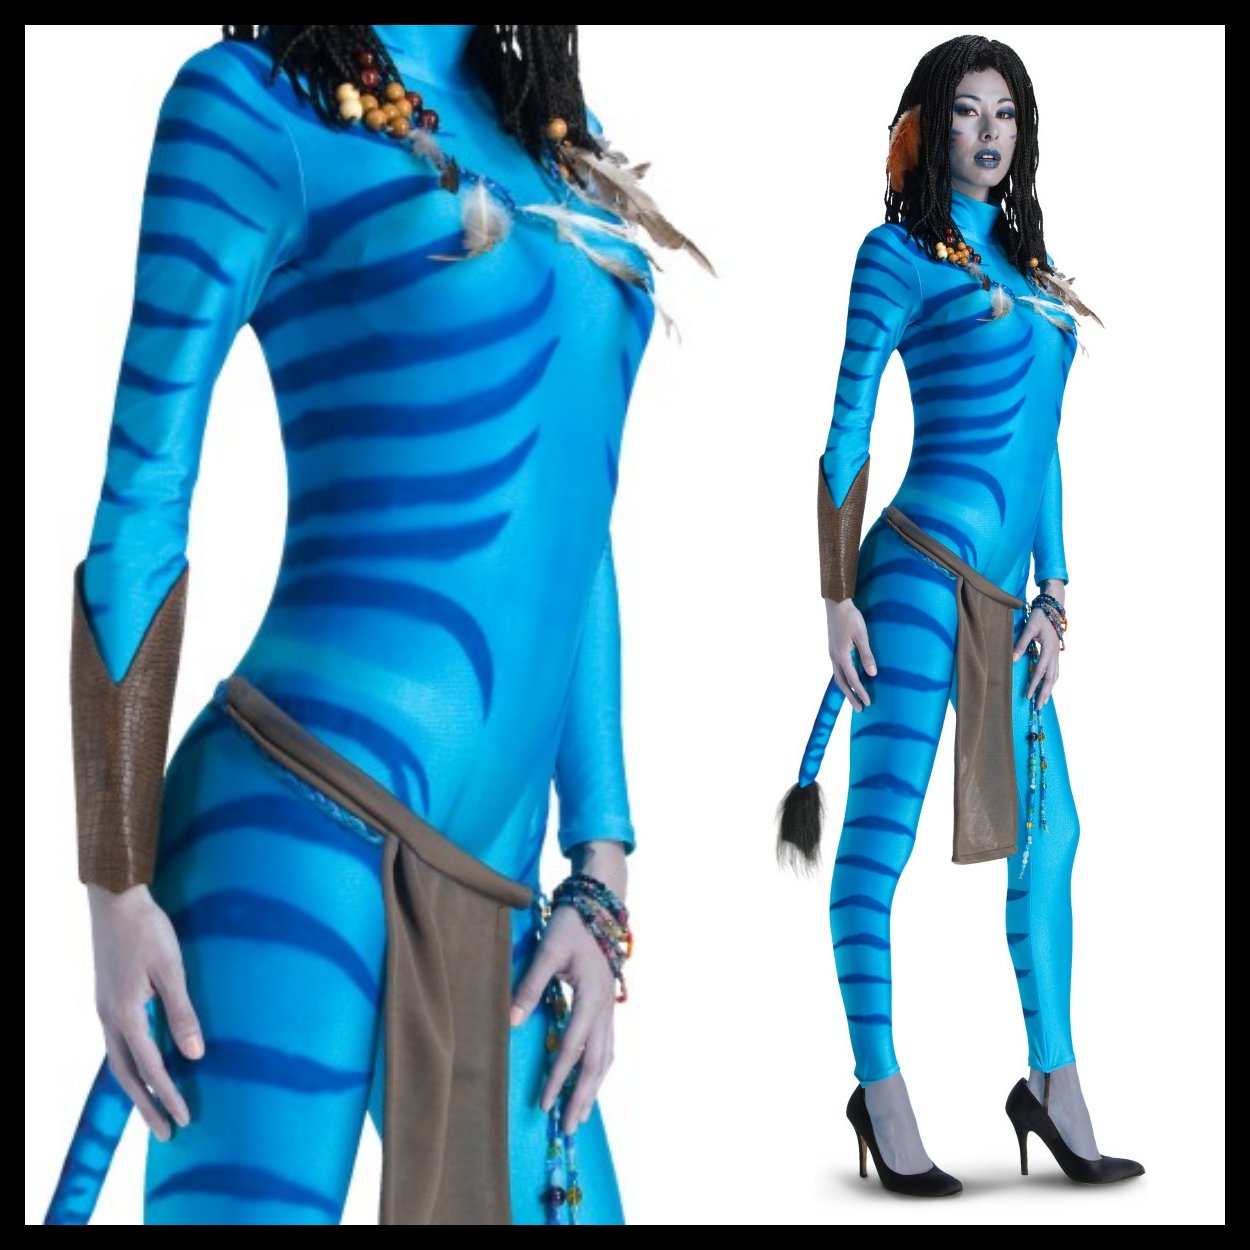 If you are an Avatar fan, making a Neytiri costume is the probably the firs...